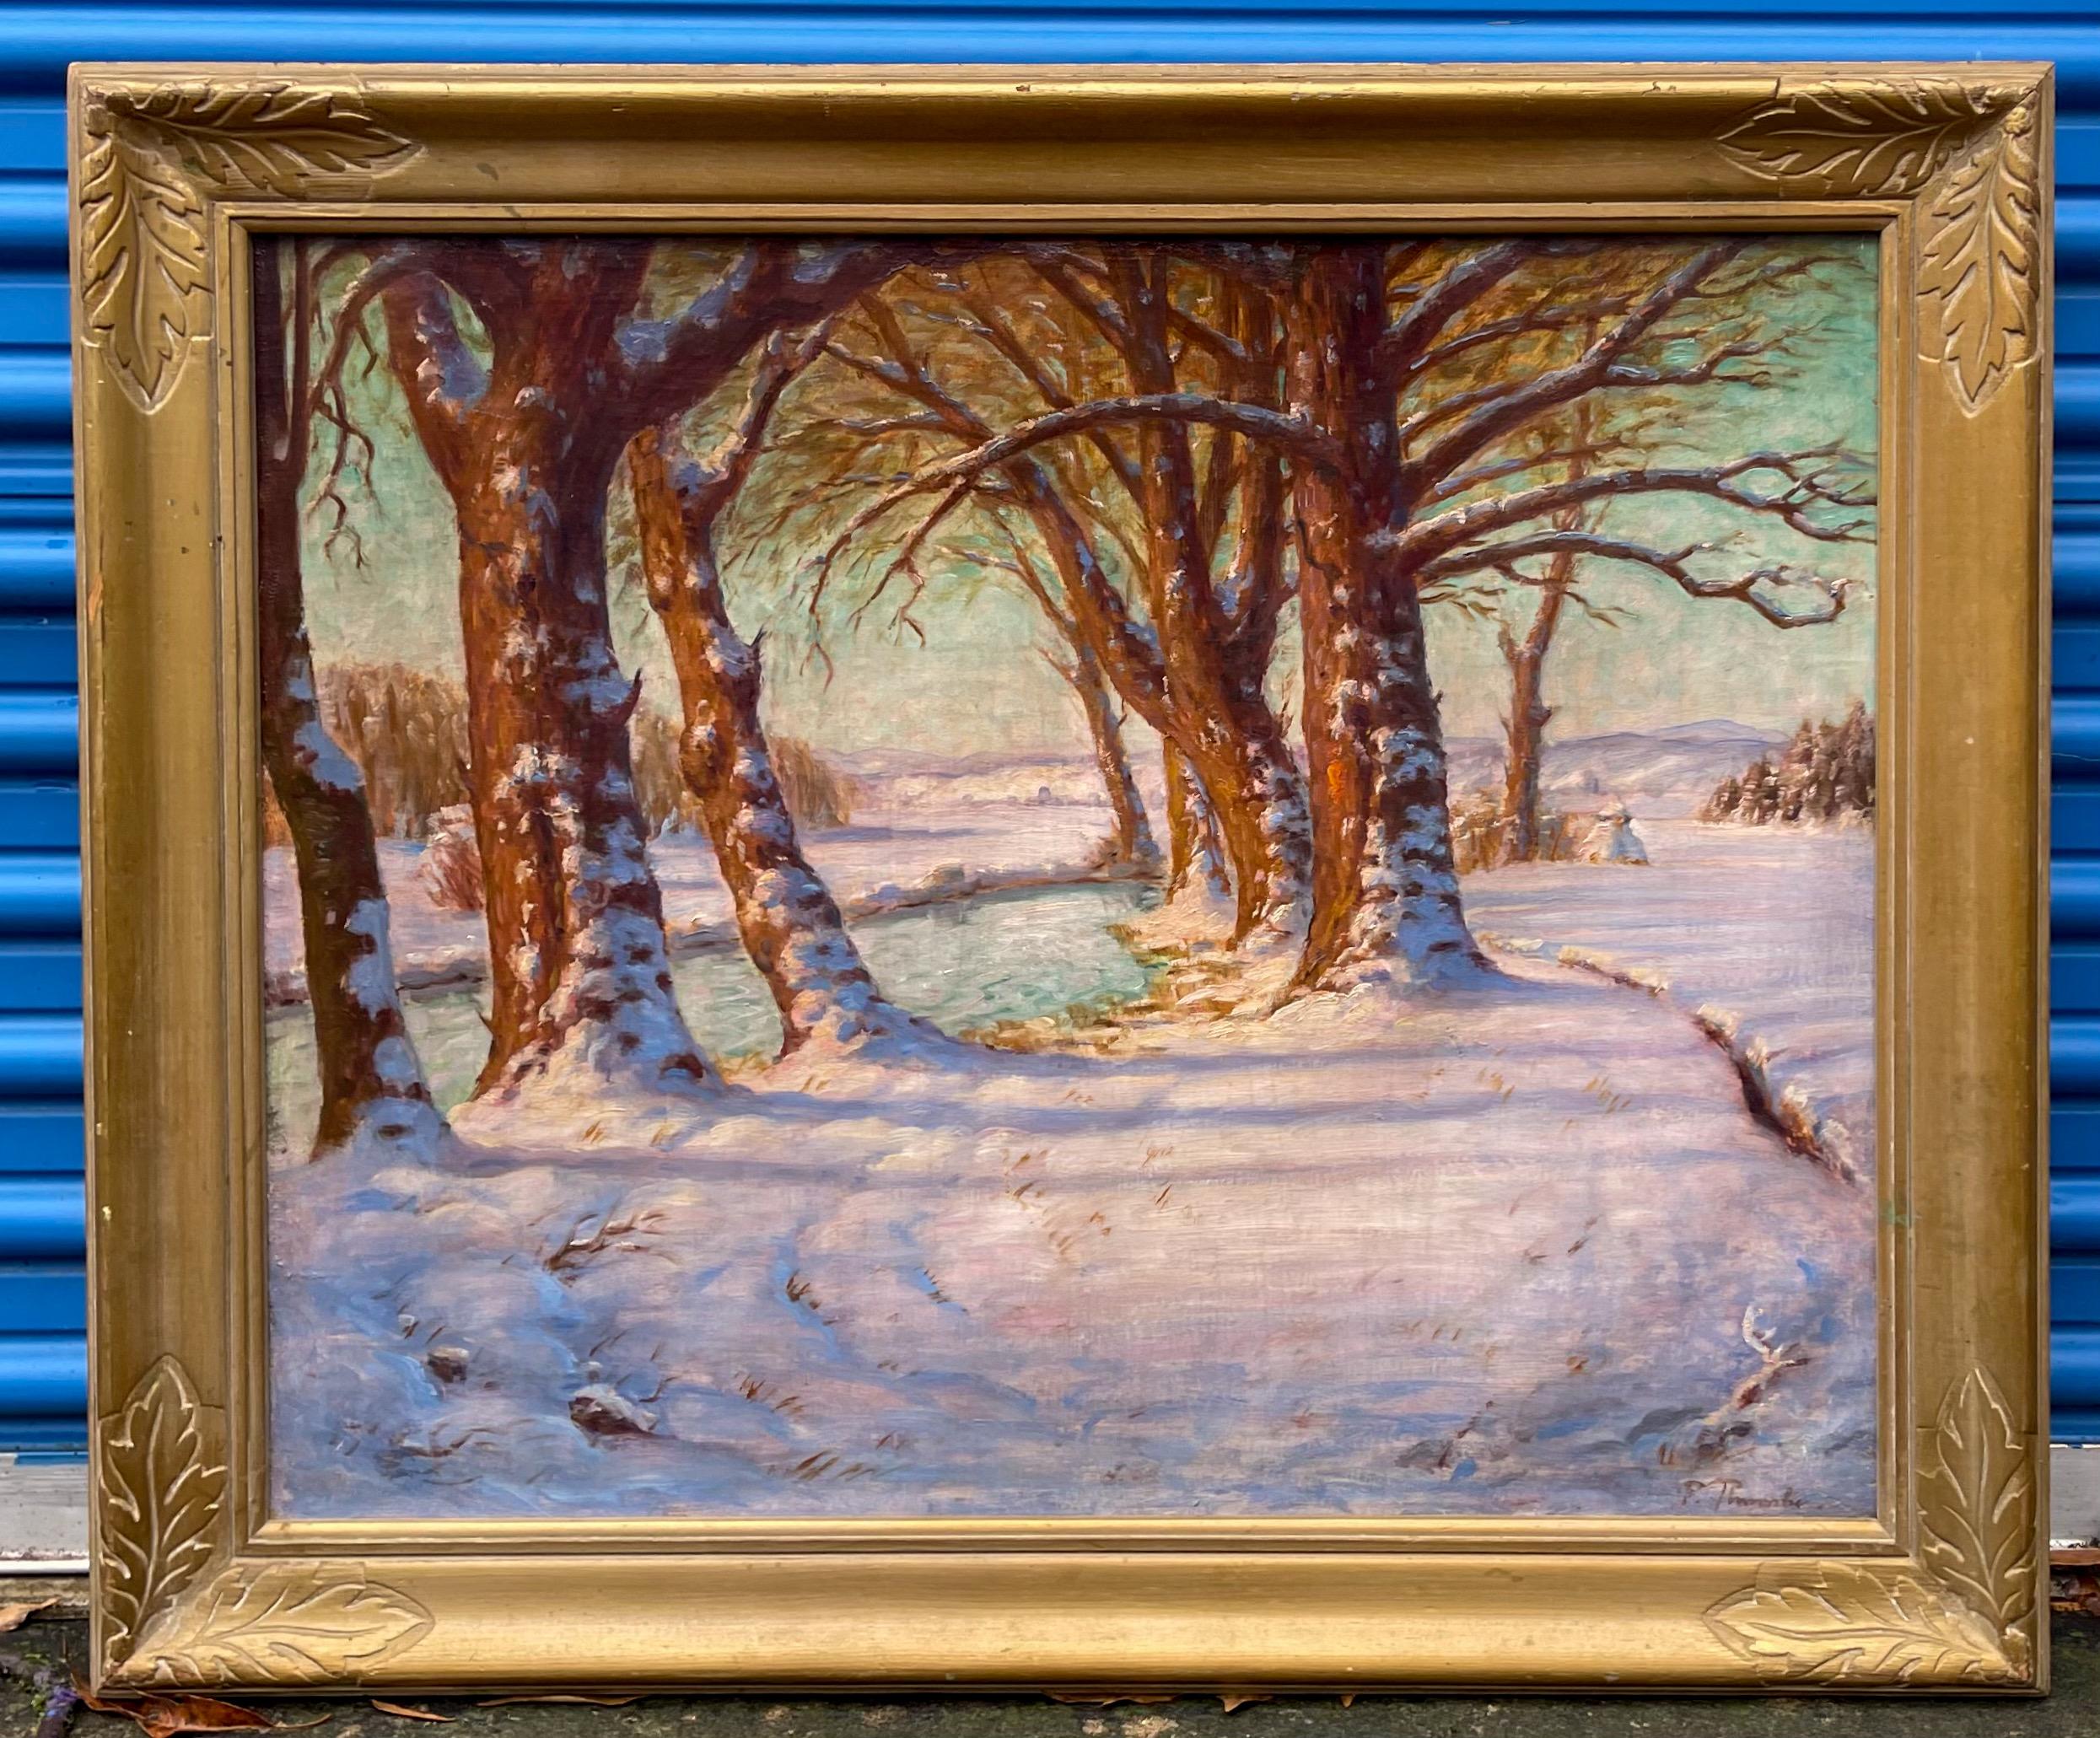 This is a Victorian era signed oil on canvas winter landscape scene in a rustic giltwood frame. Love the serenity of a snow scene, and the simplicity works in a variety of home decor.